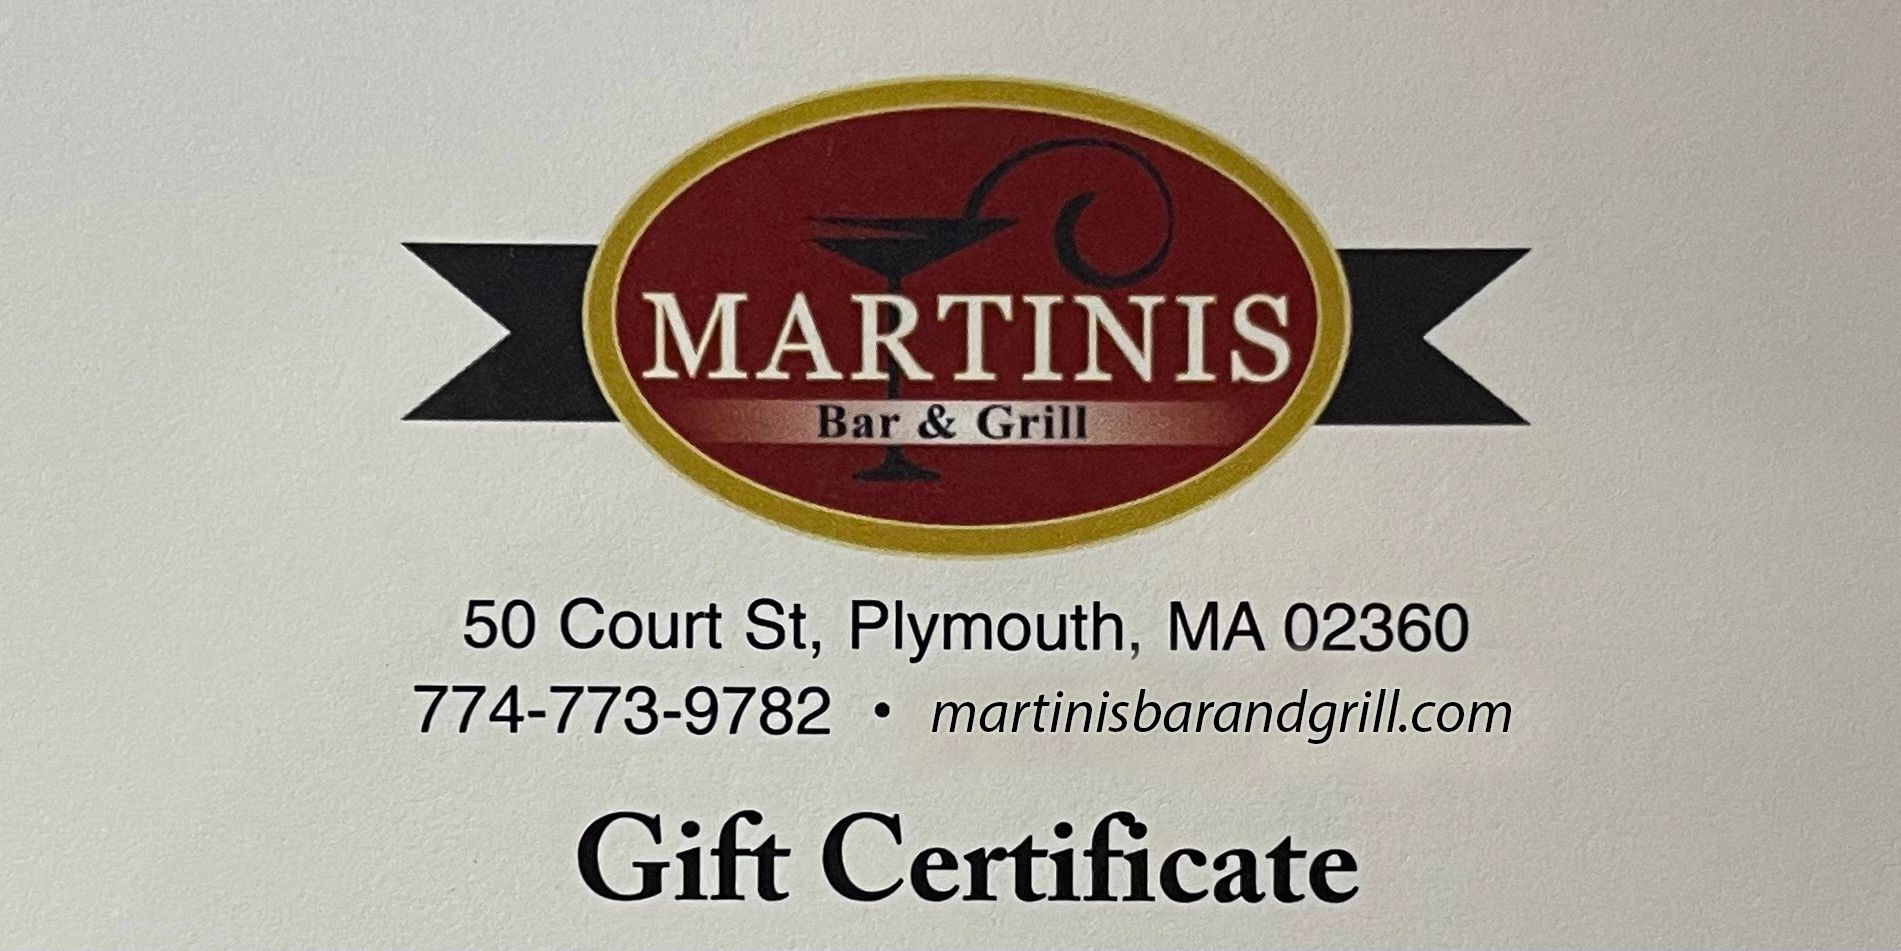 Martinis Bar and Grill gift certificate